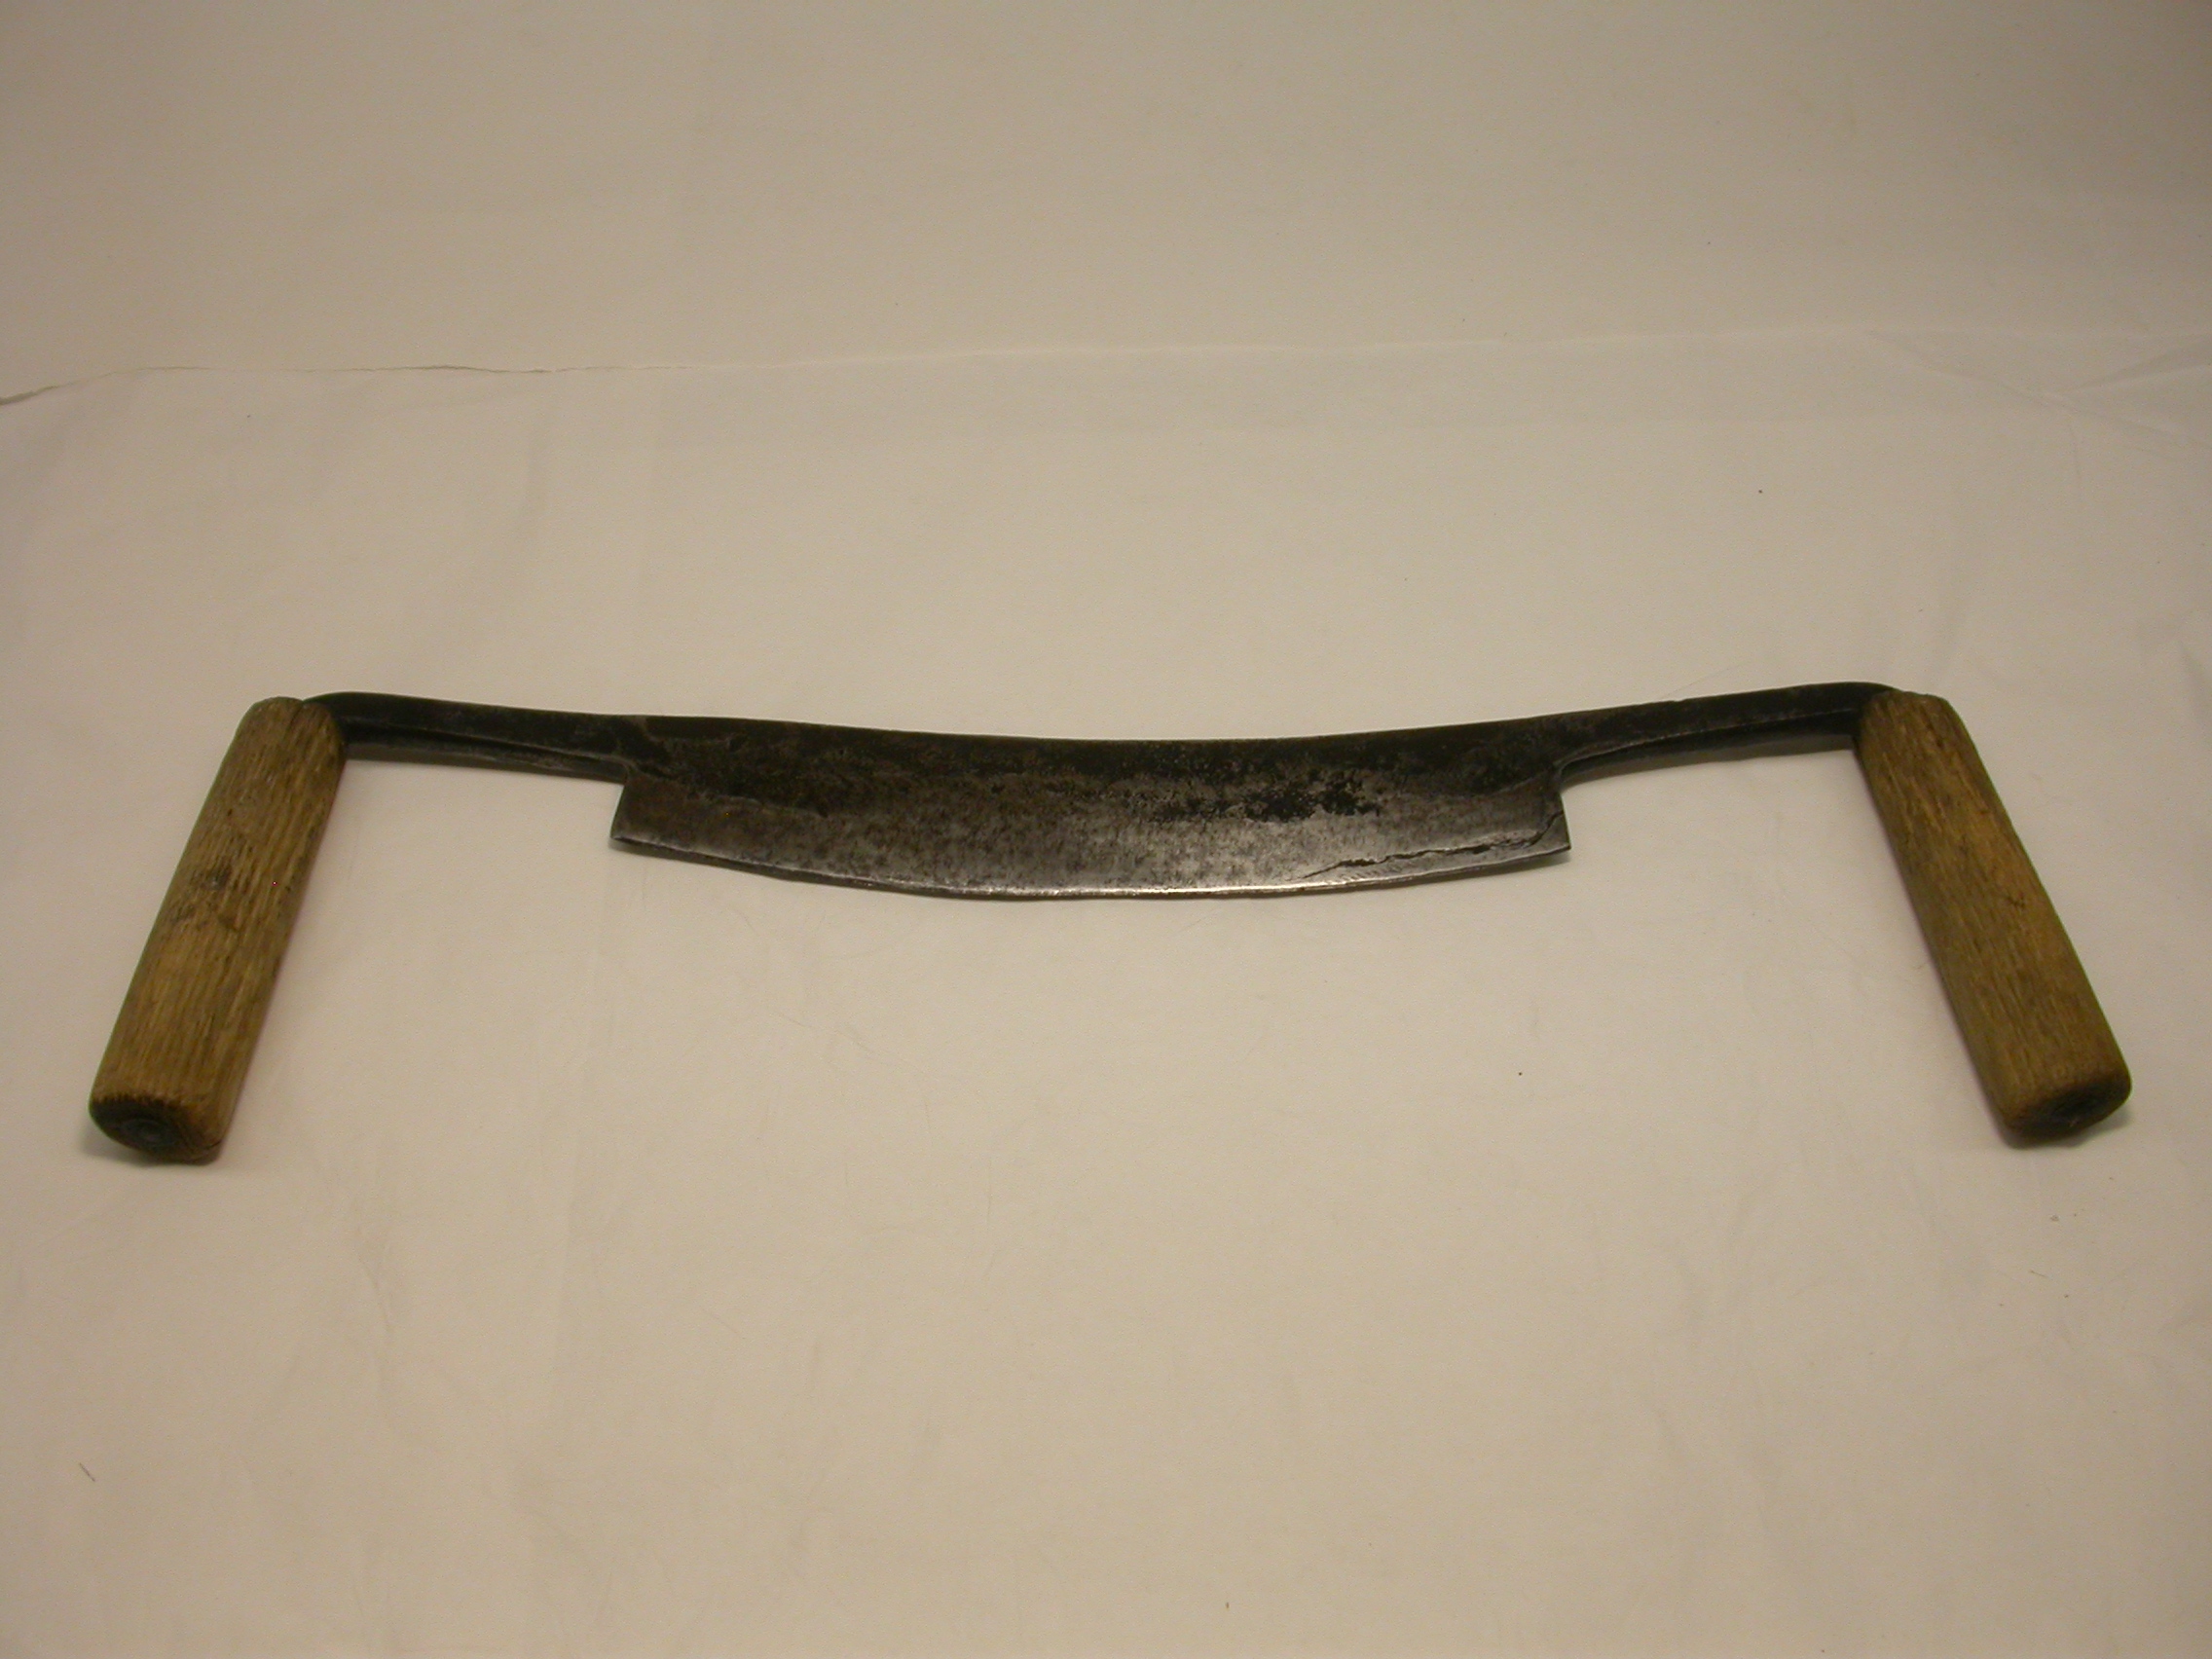 a%20metal%20drawknife%20with%20wooden%20handles